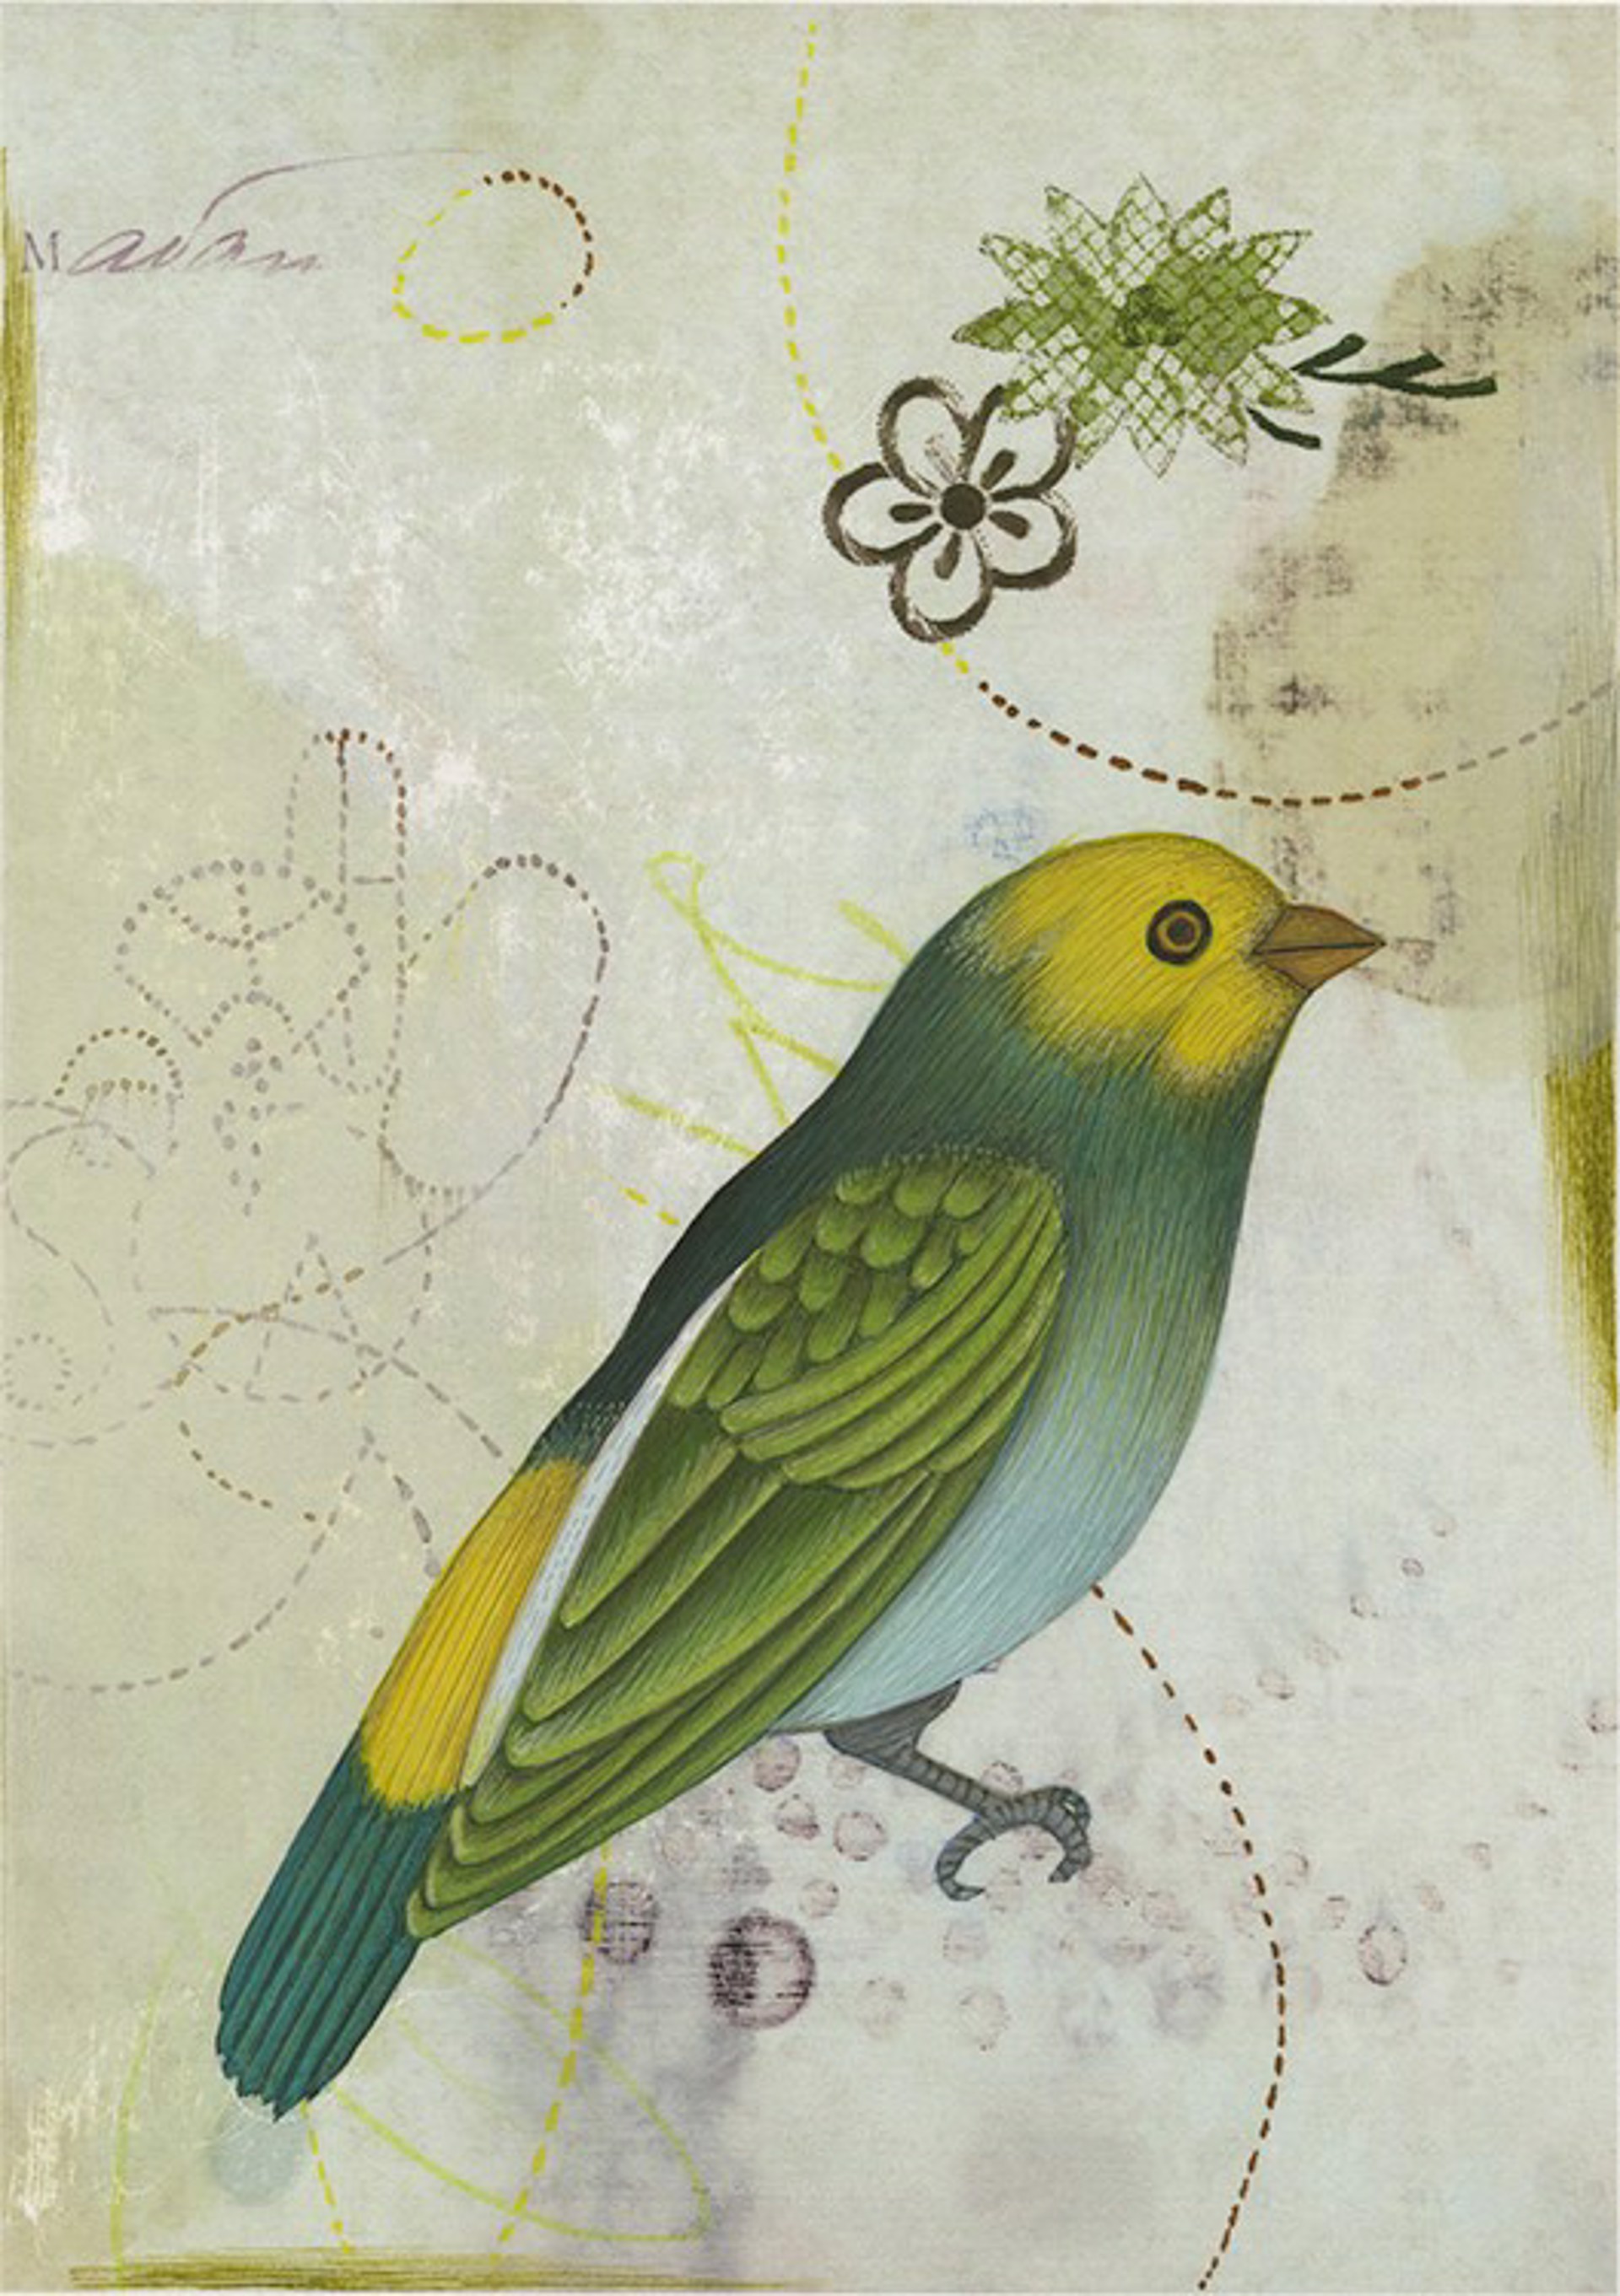 Budgie by Anne Smith